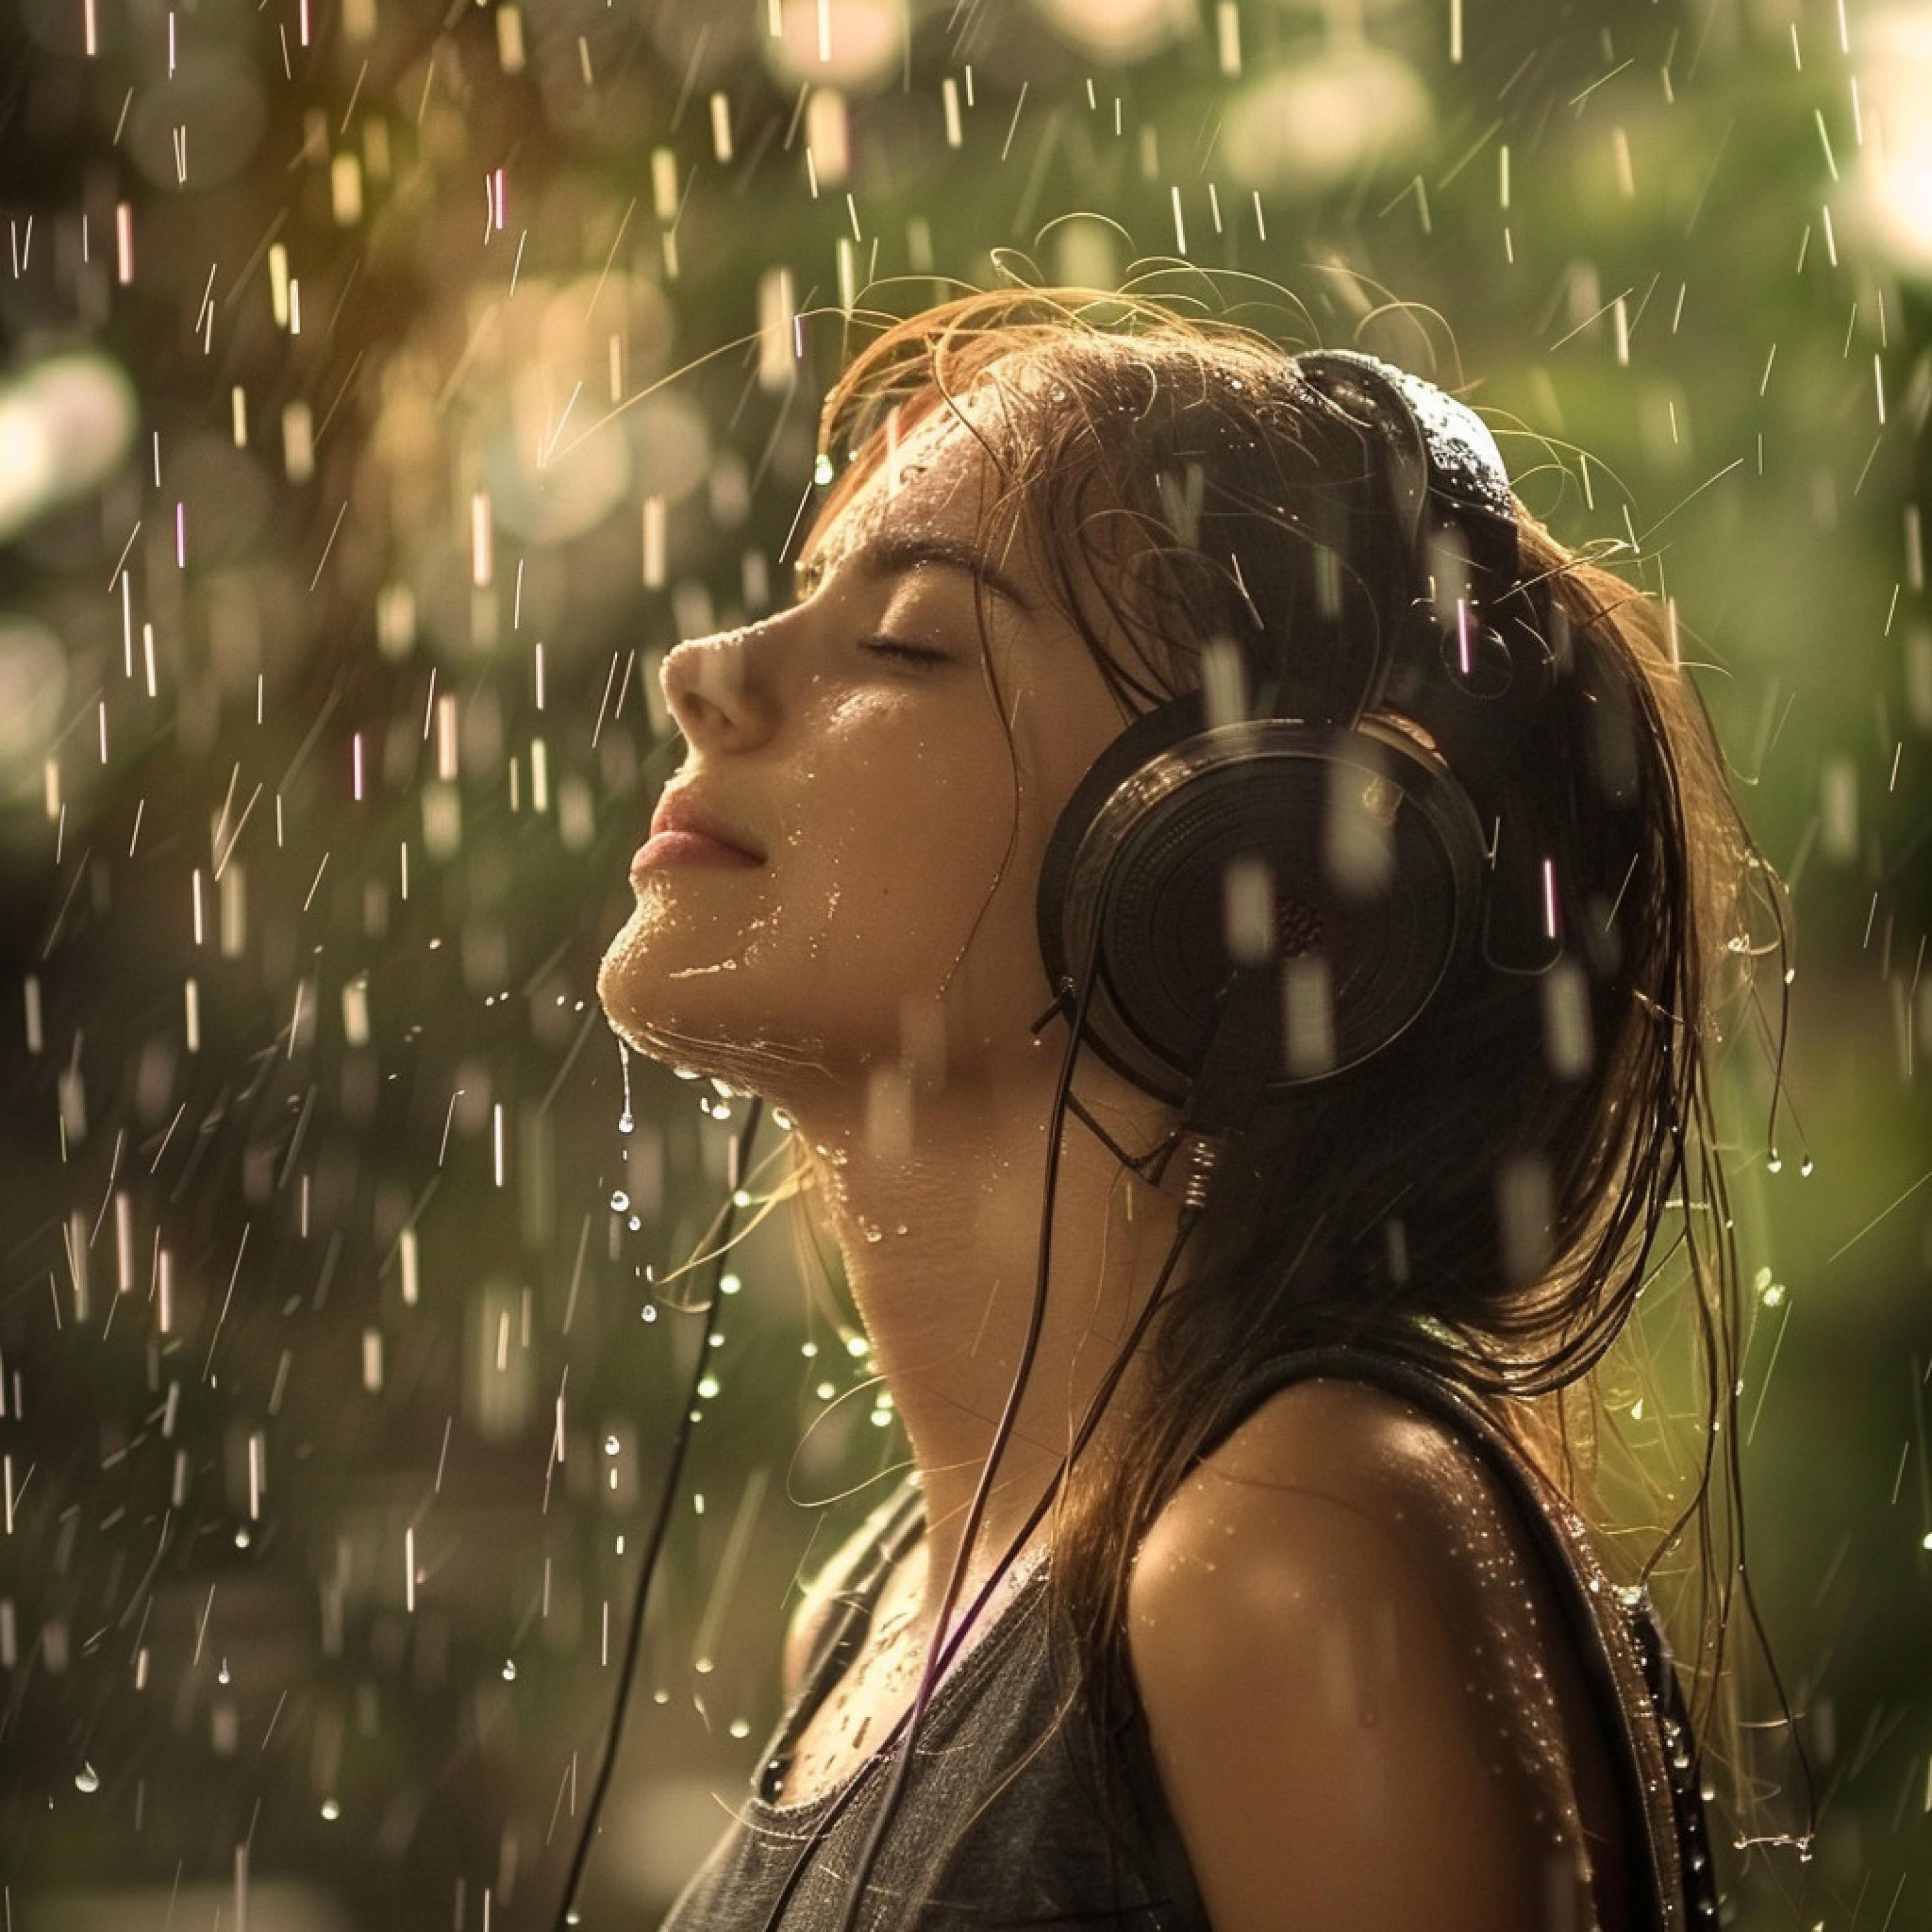 Relaxing Music Academy - Relaxation in Rain's Serenity